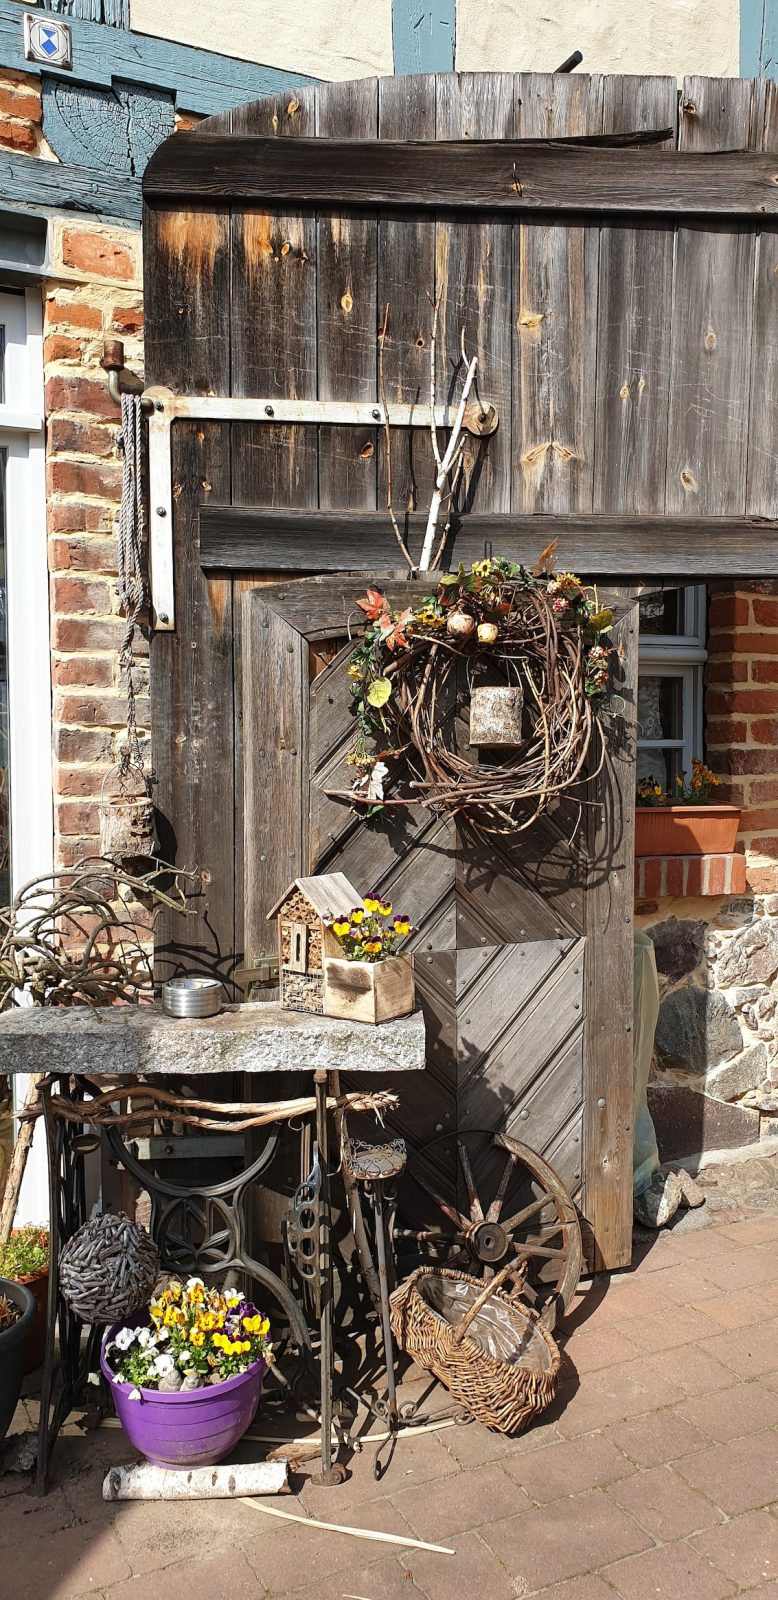 product display with birdhouse, flowers, wreaths, baskets